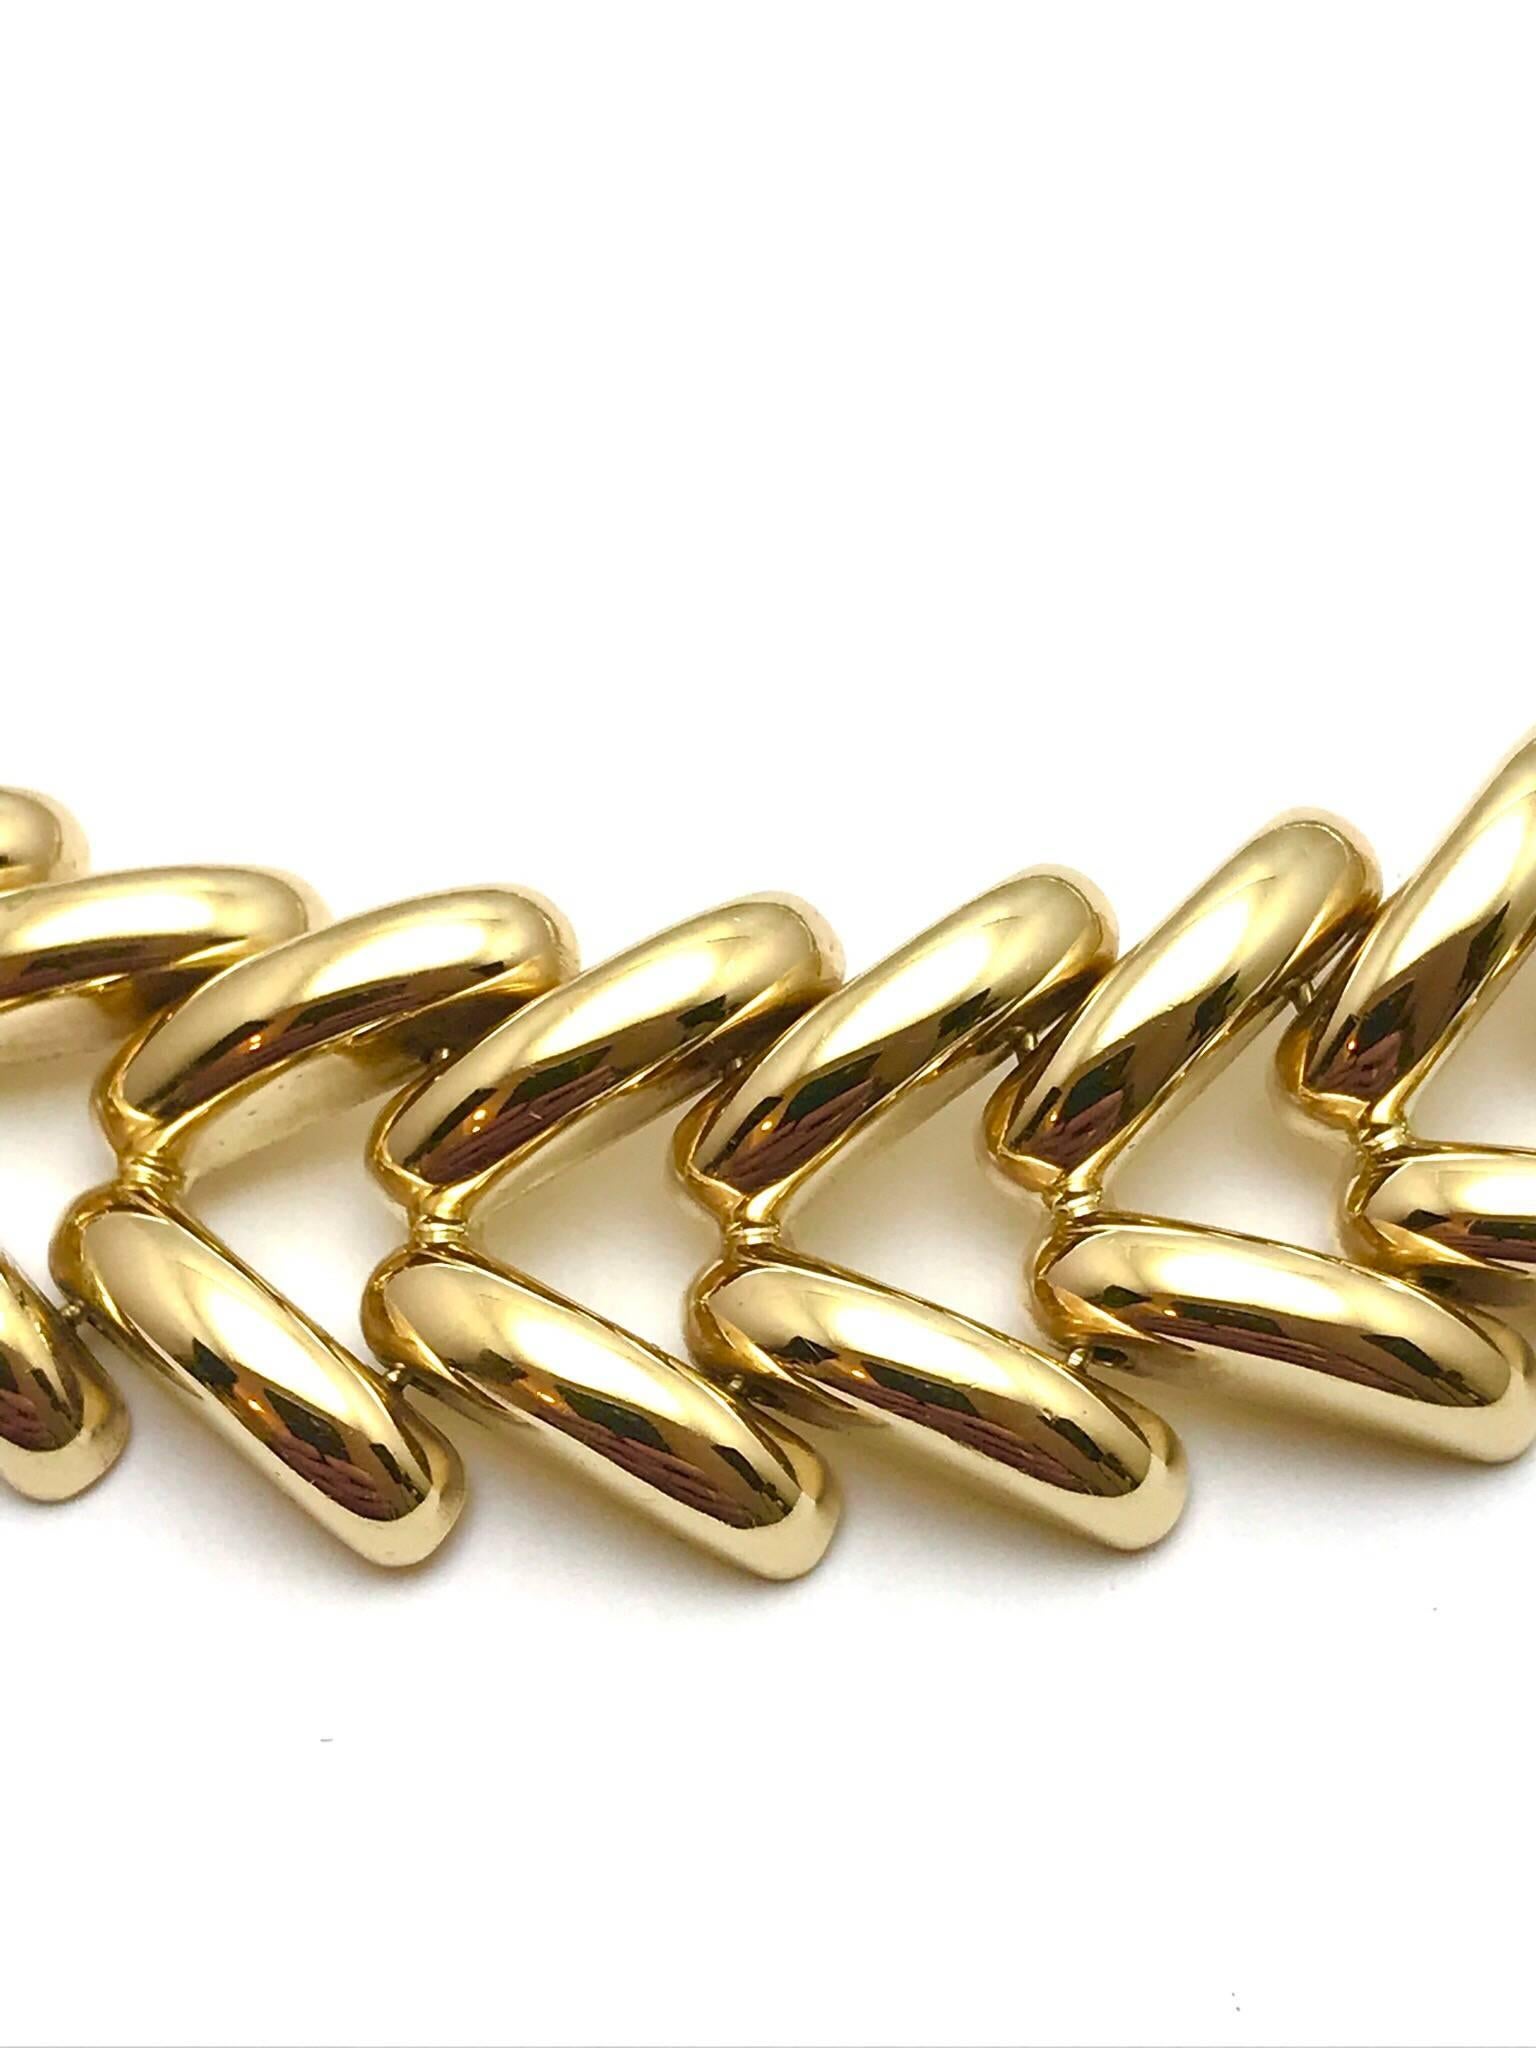 This is a fantastic piece for a night out!  A 15.50 inch 14 karat yellow gold collar/choker necklace.  The links are designed in a chevron shape, finished with a high polish to give them a noticeable shimmer.

Hallmark:  585  Italy